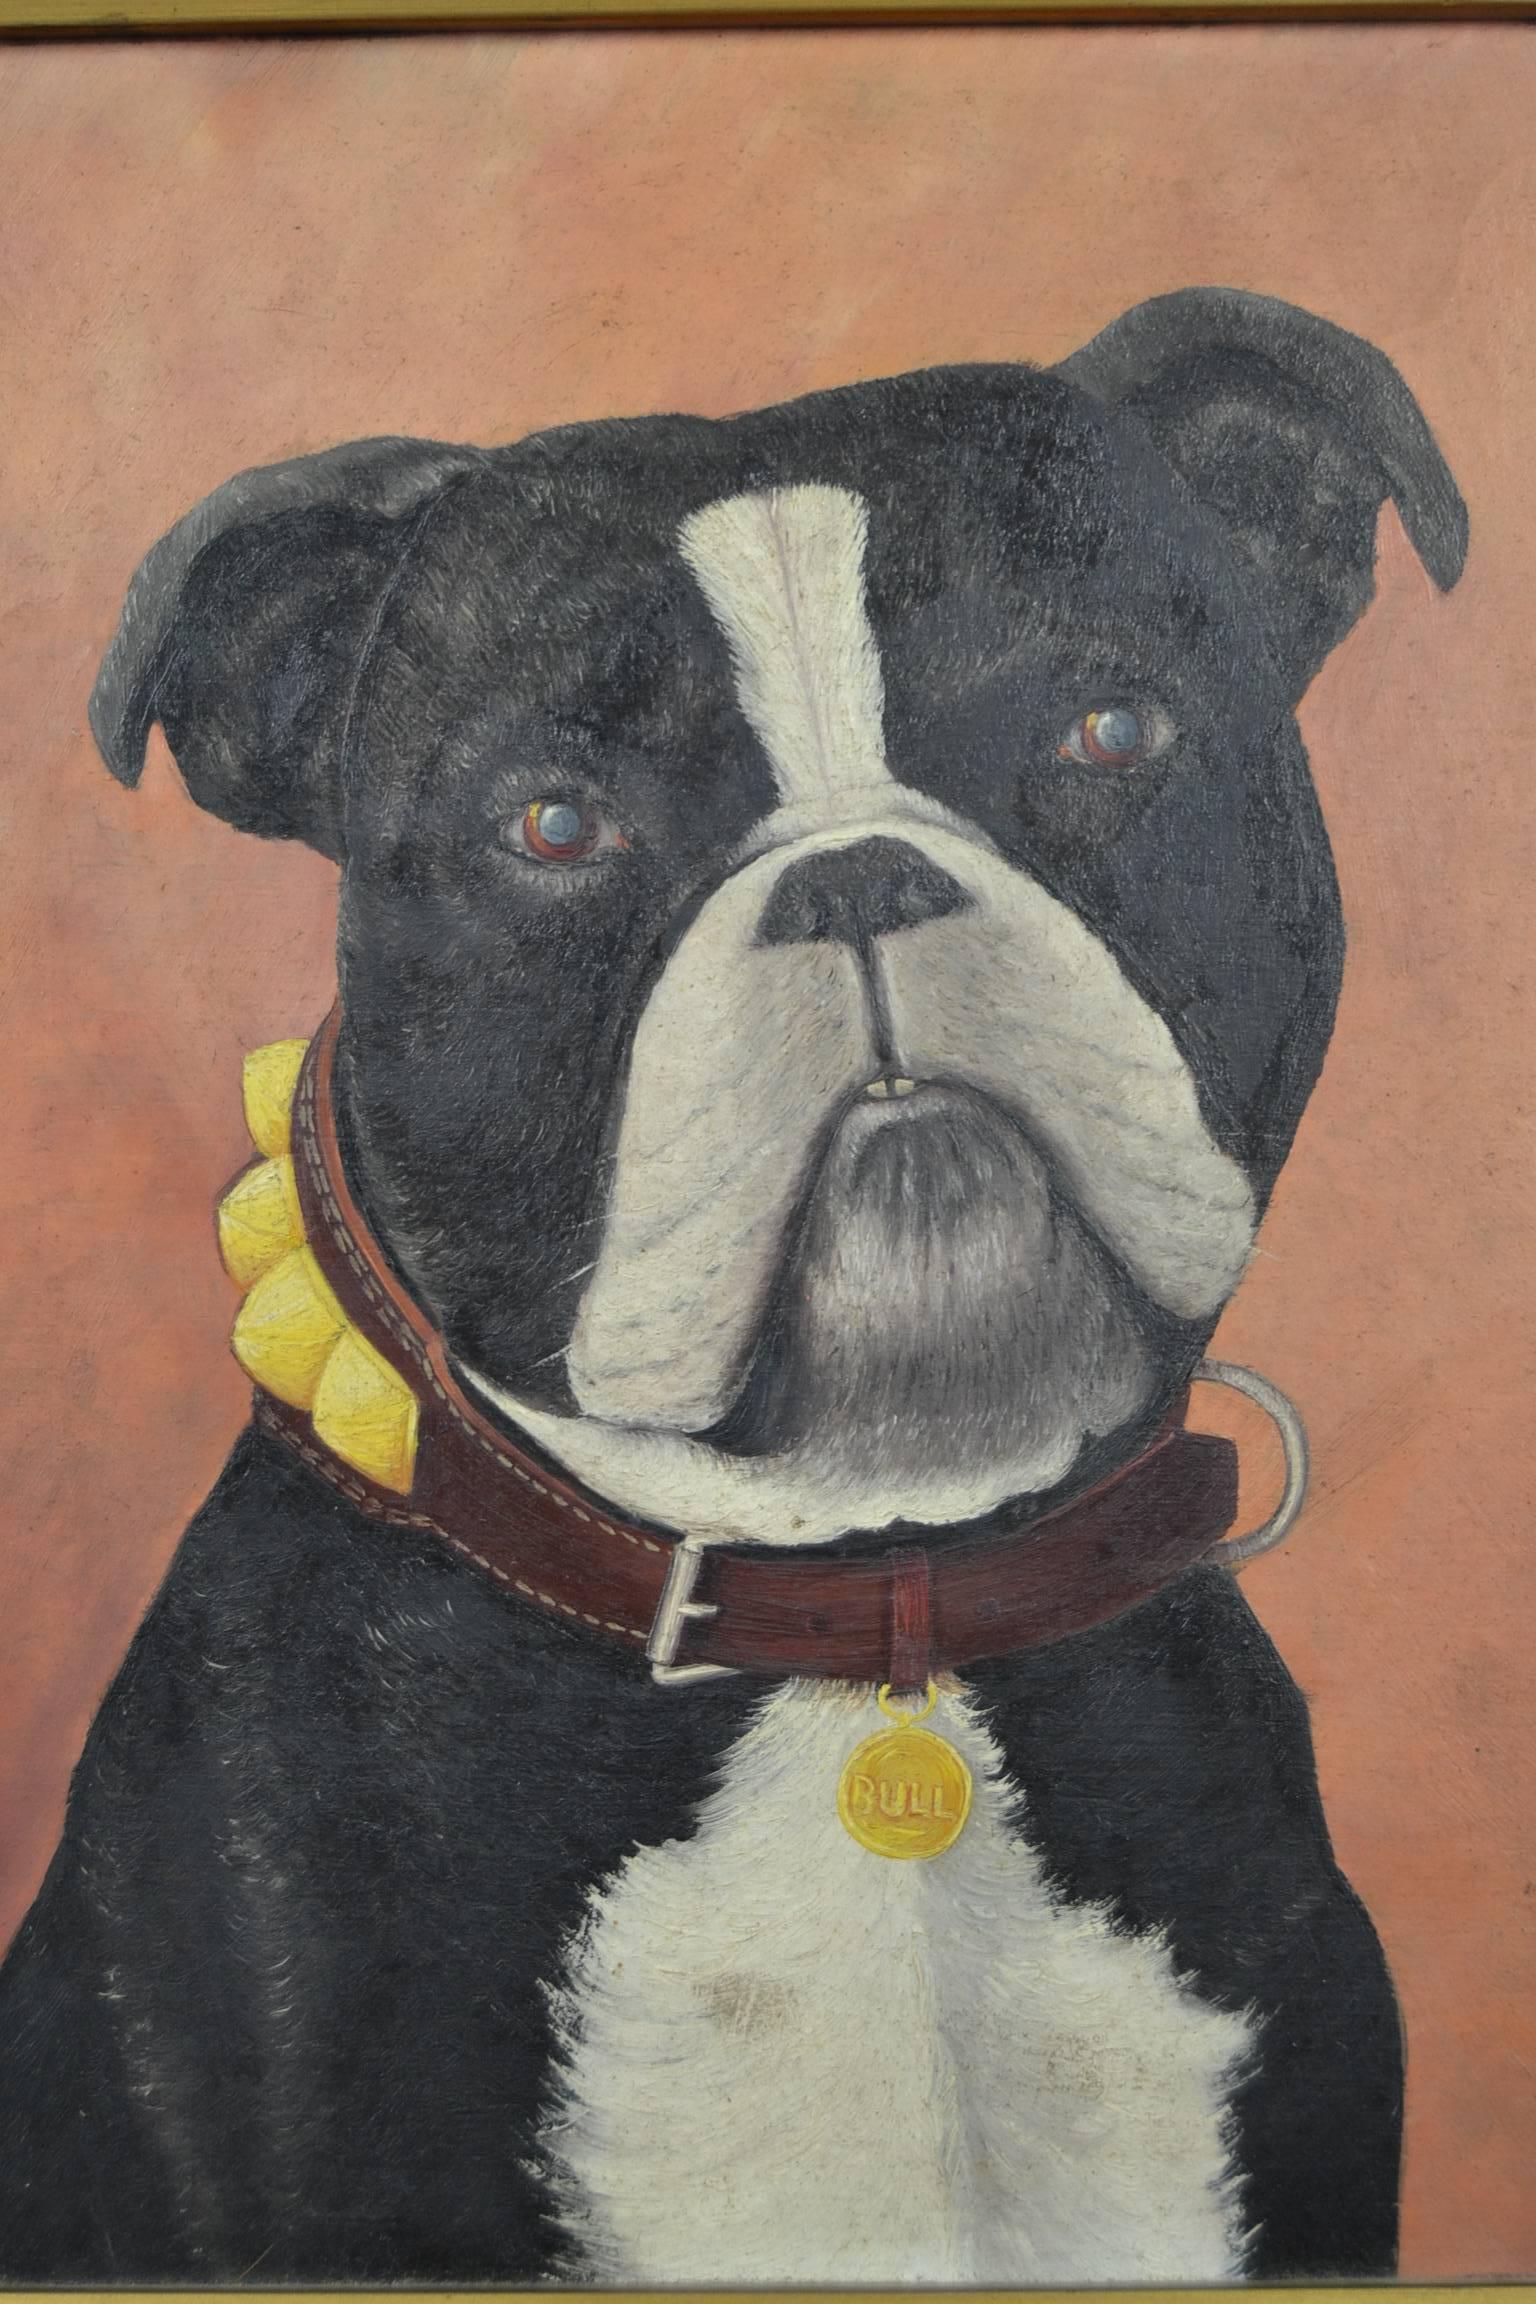 Lovely handmade vintage painting of a French or old English bulldog proud sitting dog portrait with the name bull on his collar. 
Painted on a wooden panel, framed in a beautiful black colored wooden framework with nice old patina.
Not signed